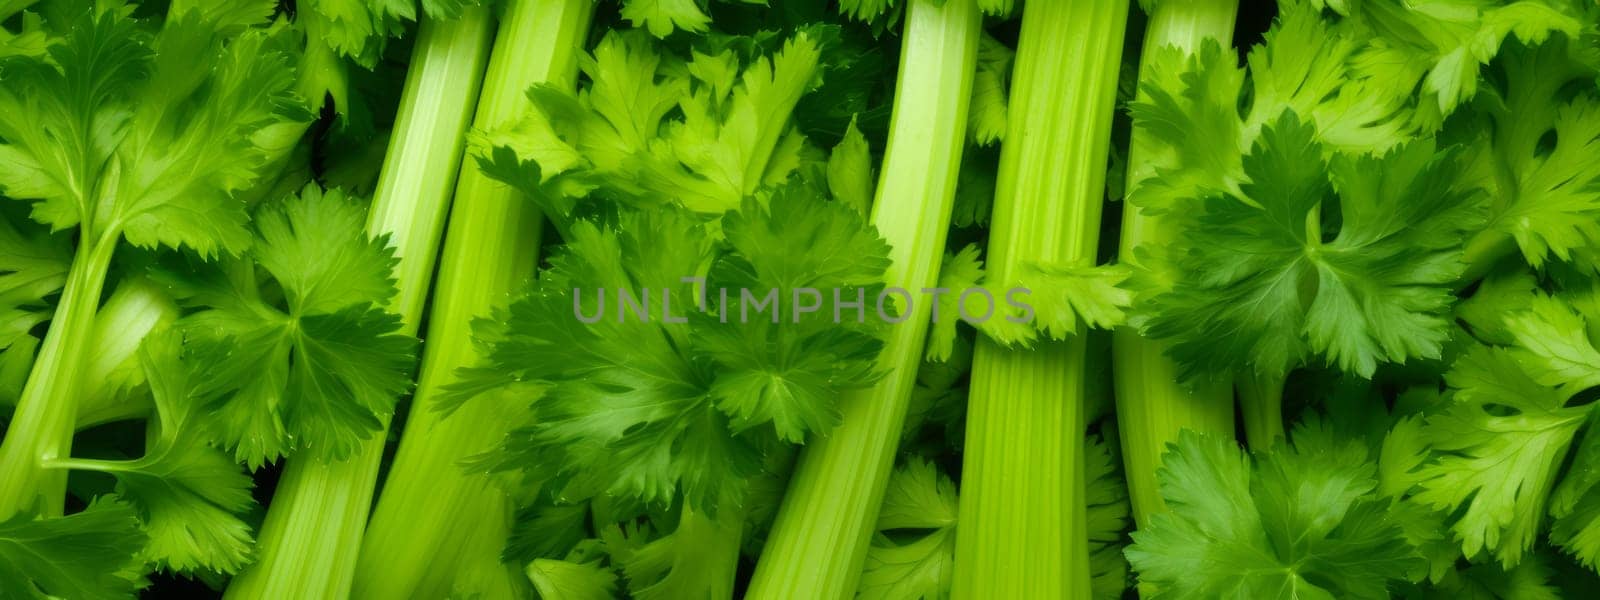 Fresh green celery texture background, Seamless close up